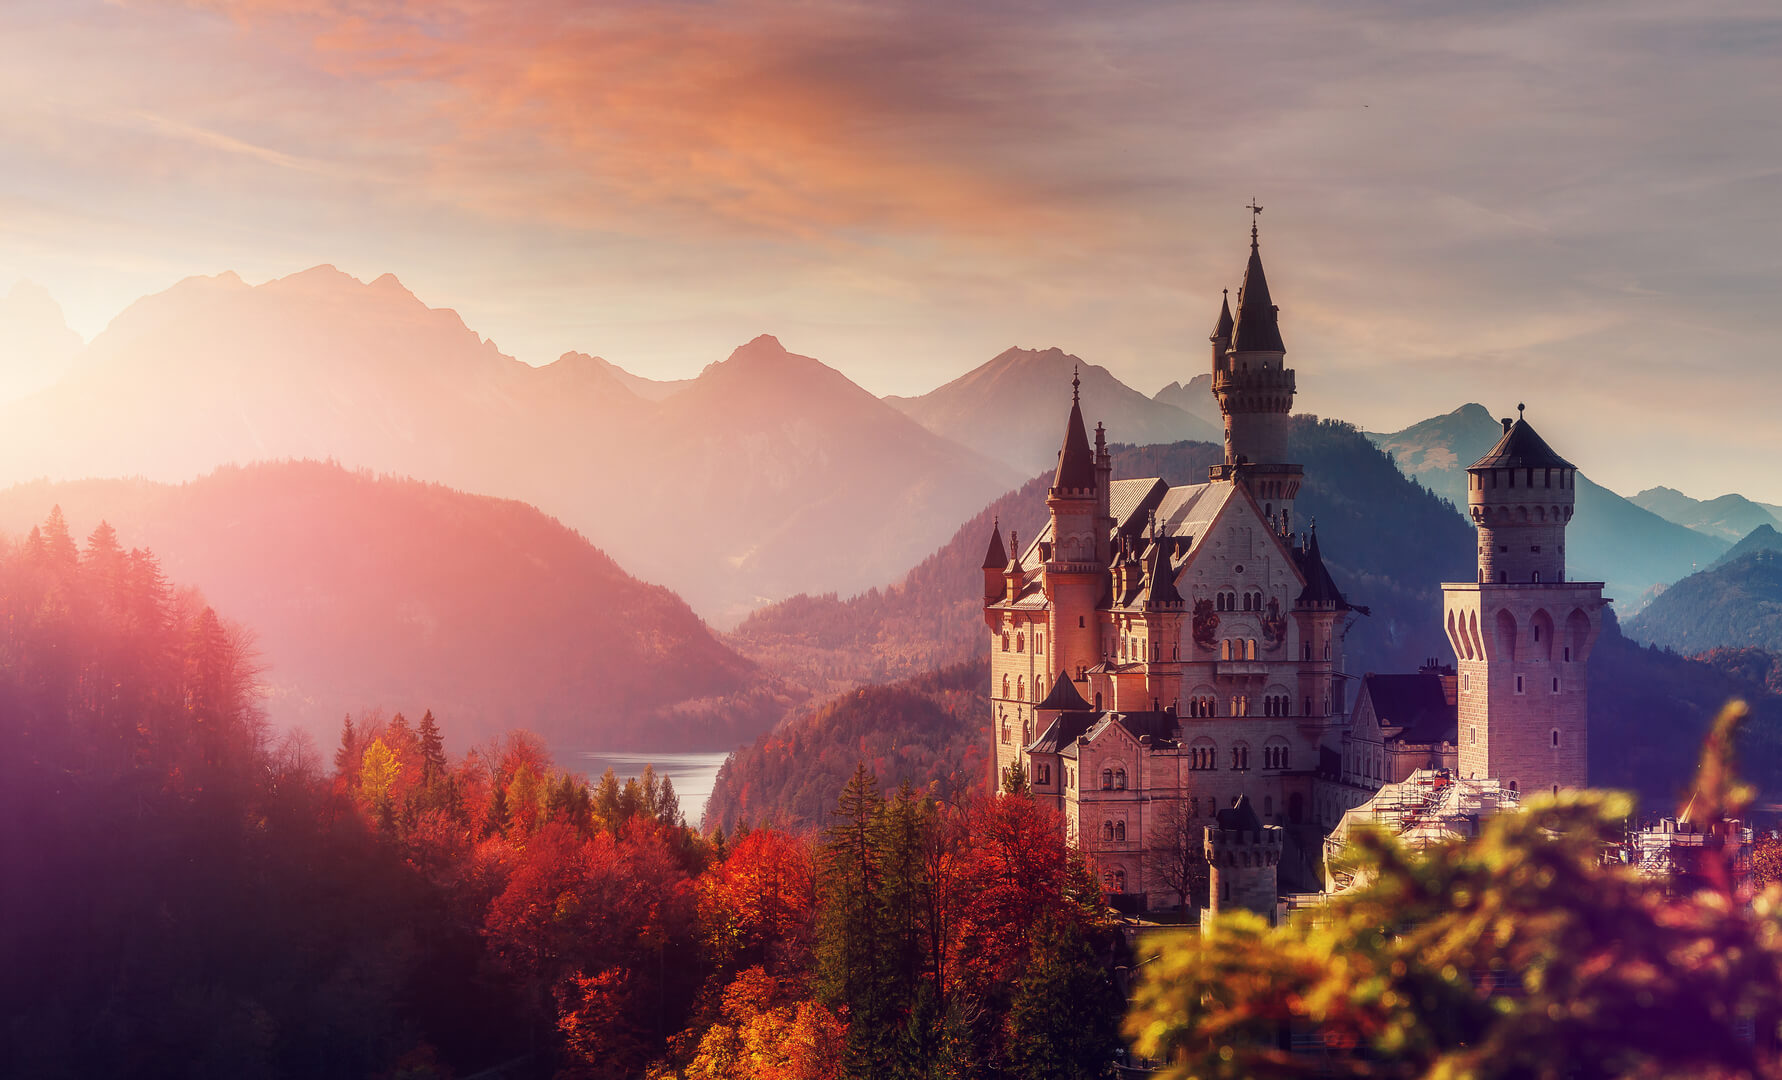 Tipical postcard. Majestic Neuschwanstein castle during sunset, with colorful clouds under sunlight.